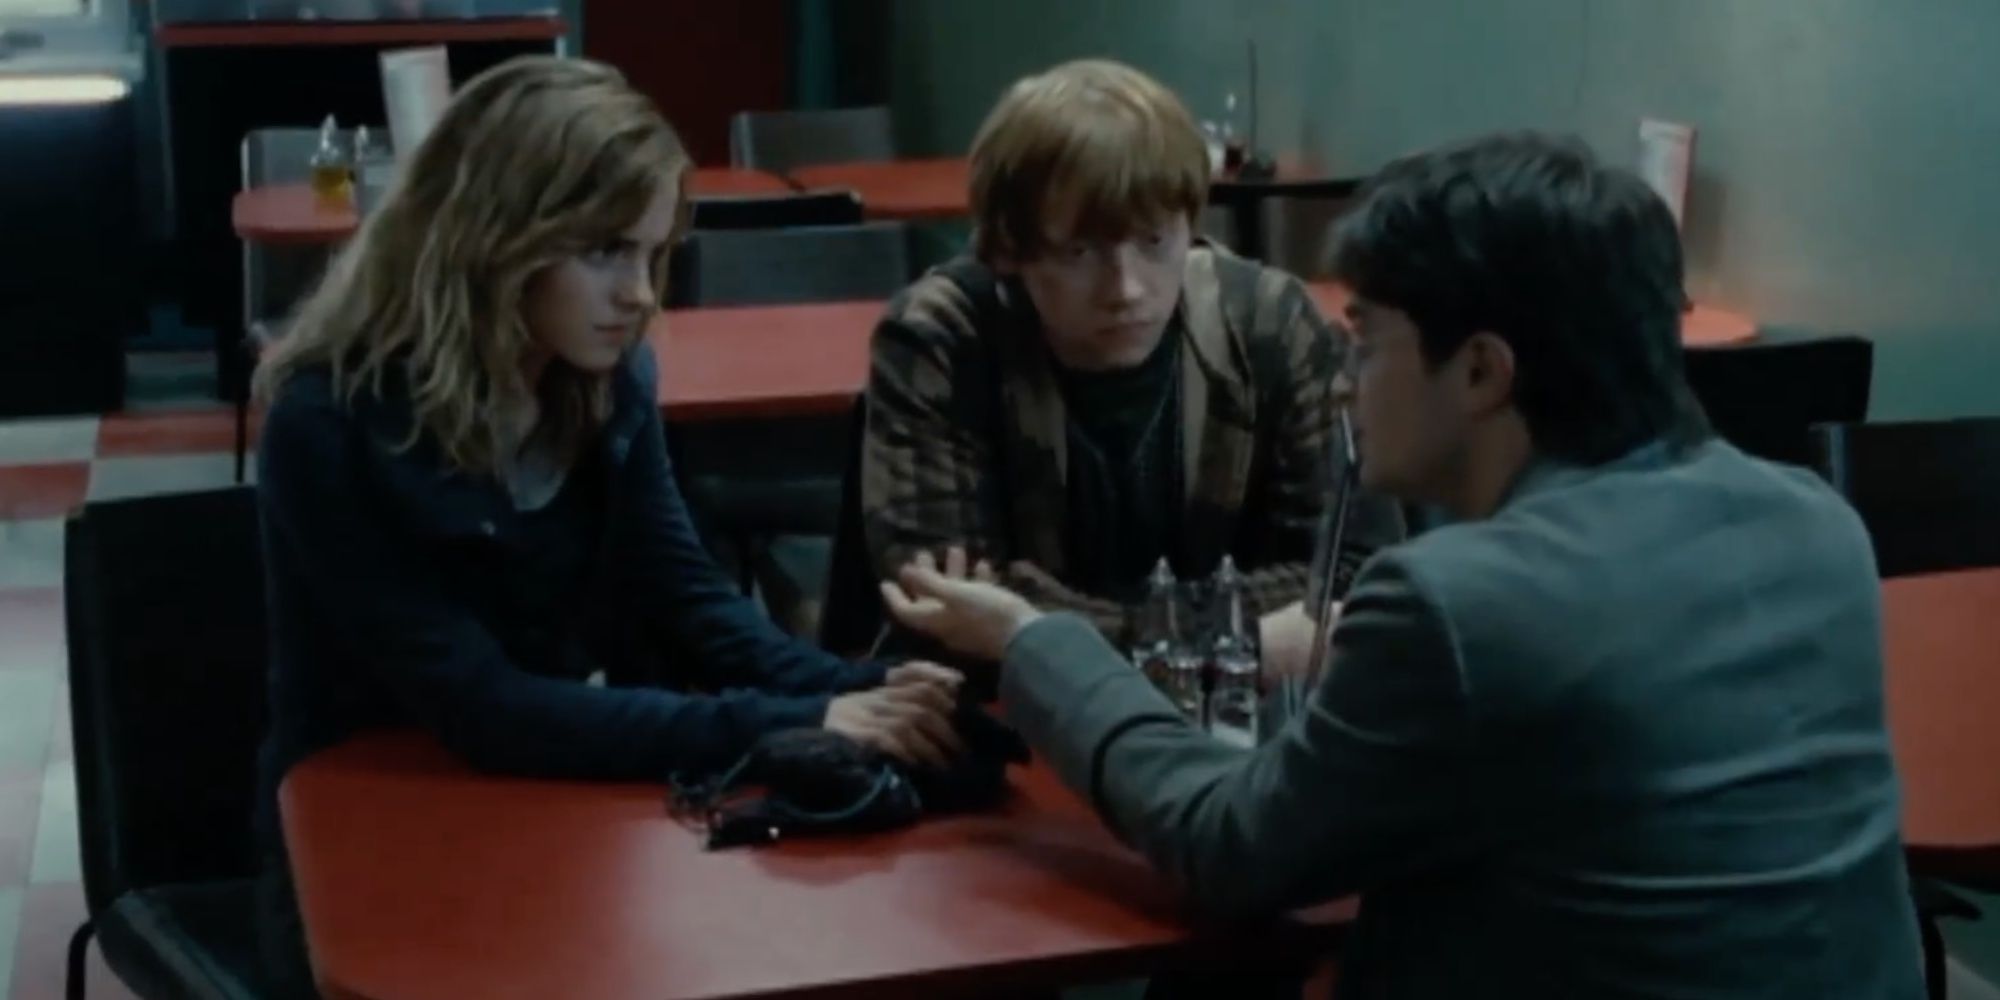 Ron sitting with Harry and Hermione in Deathly Hallows Part 1